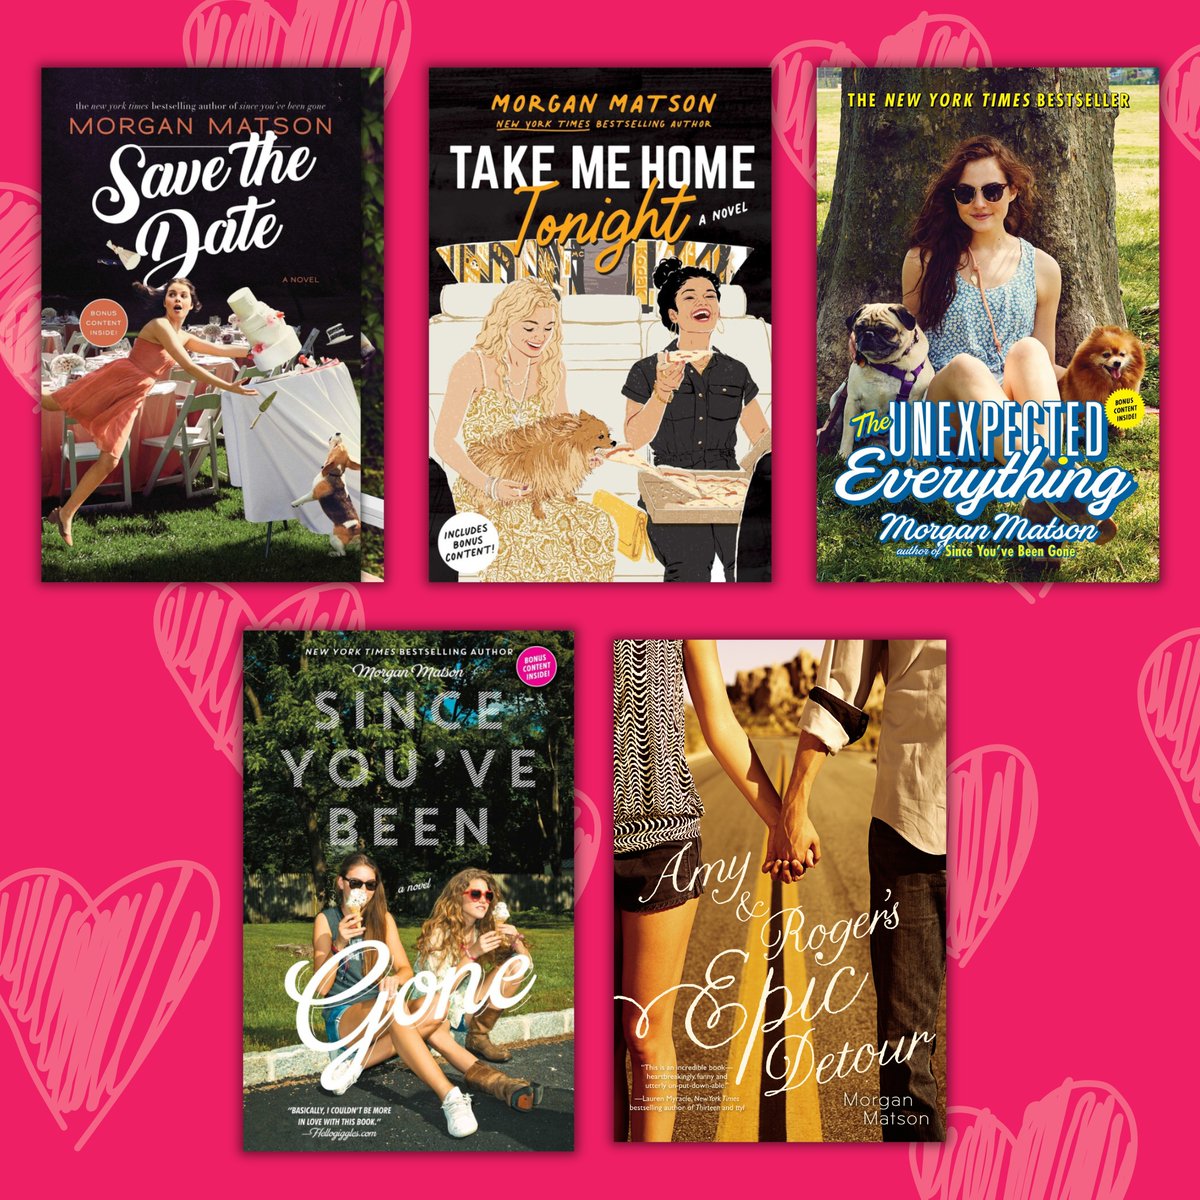 It's #MorganMatsonMay, and we're celebrating with a few extra special #FreeReads! 👀 Read them all for FREE from 5/1 - 5/10 only on SimonTeen.com! @morgan_m